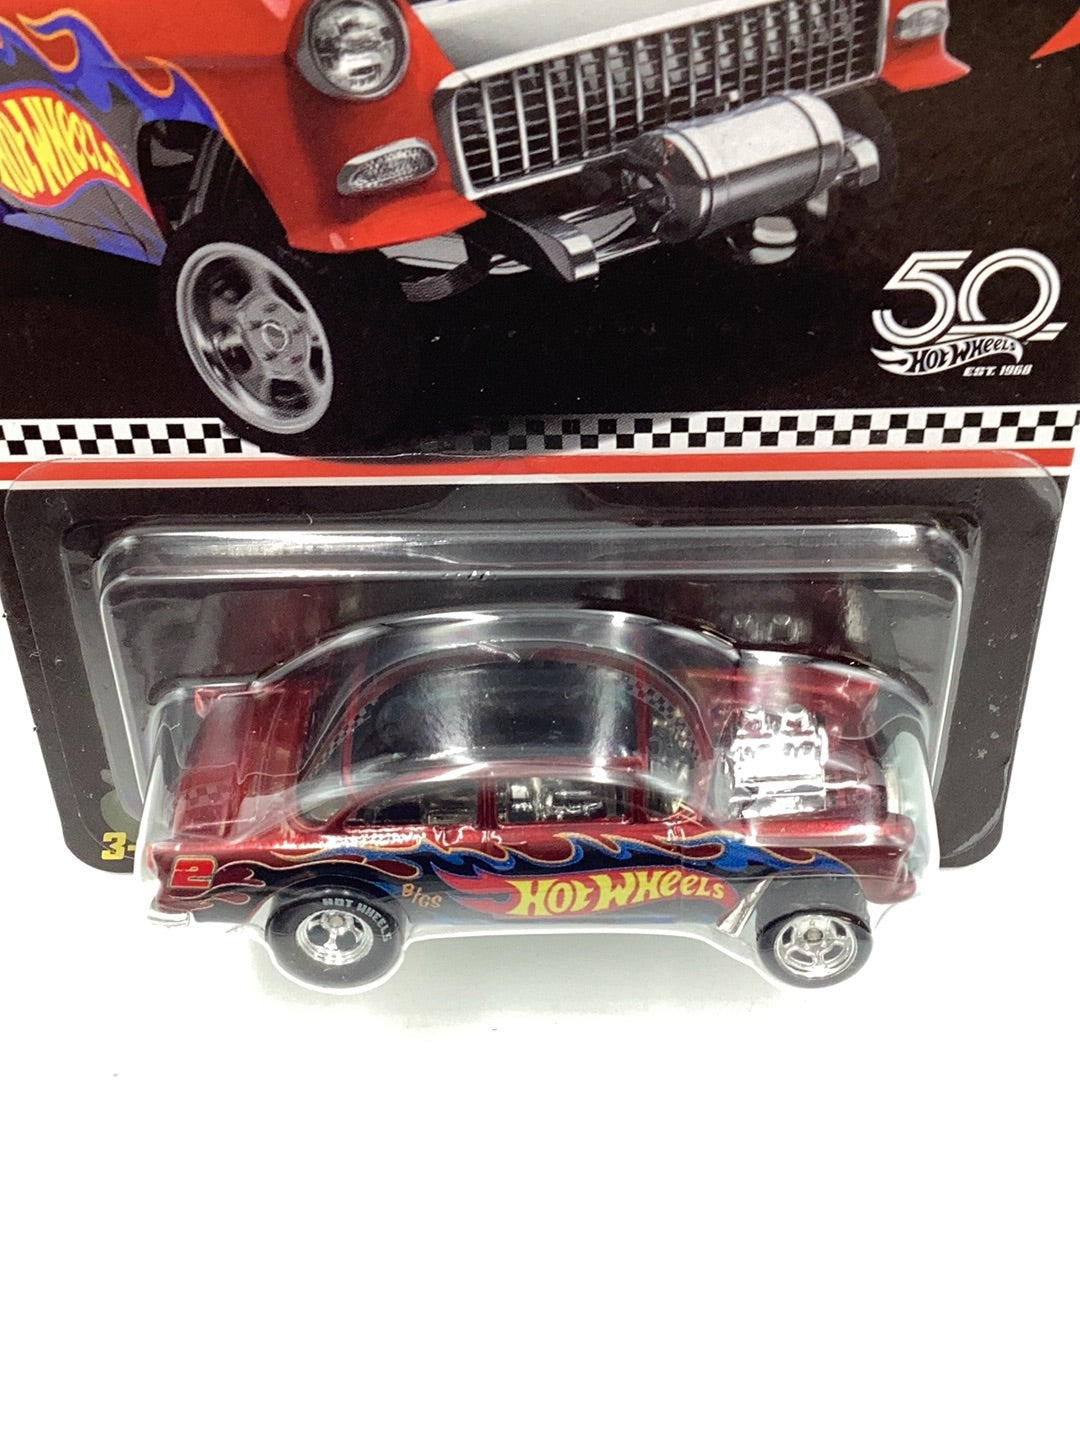 Hot wheels 2018 mail in collectors edition 55 Chevy Bel Air Gasser with protector